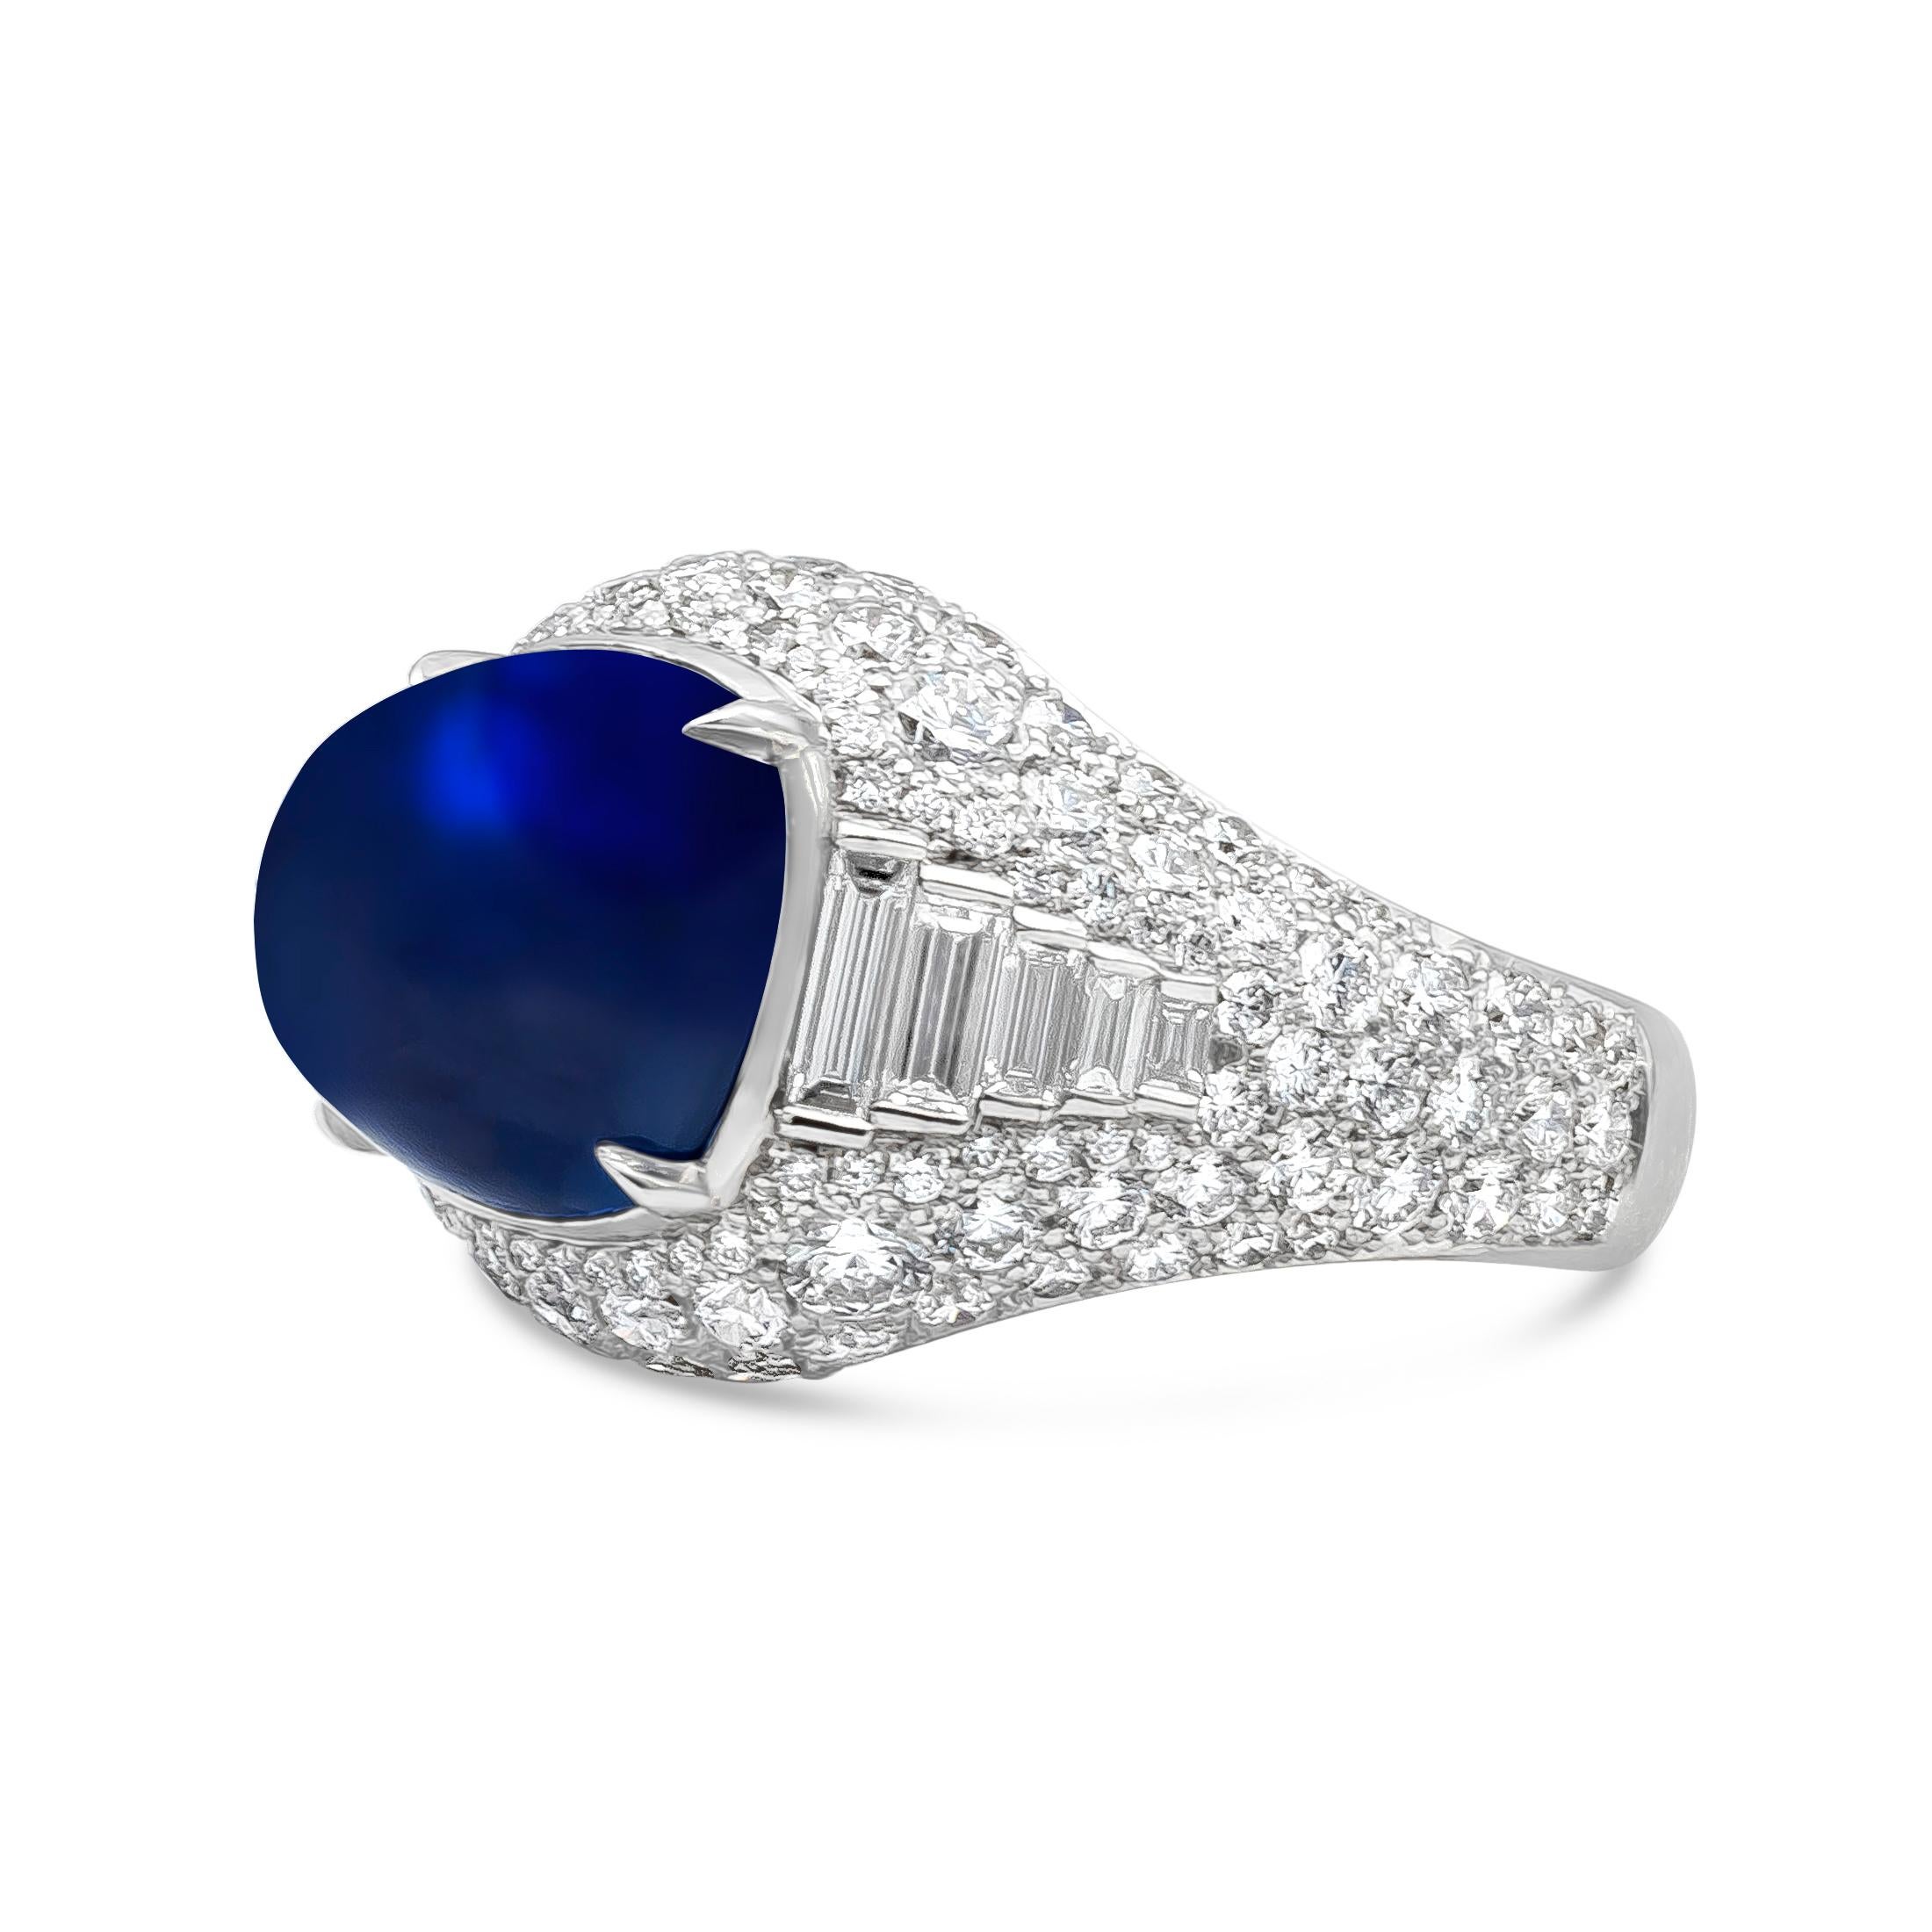 A stylish and high end cocktail ring, showcasing  8.42 carats of elongated blue cabochon surrounded by 10 baguette diamonds of 0.65 carat total and 69 round diamonds of 2.03 carats total. All white diamonds have D-E-F color and VS clarity. Set on